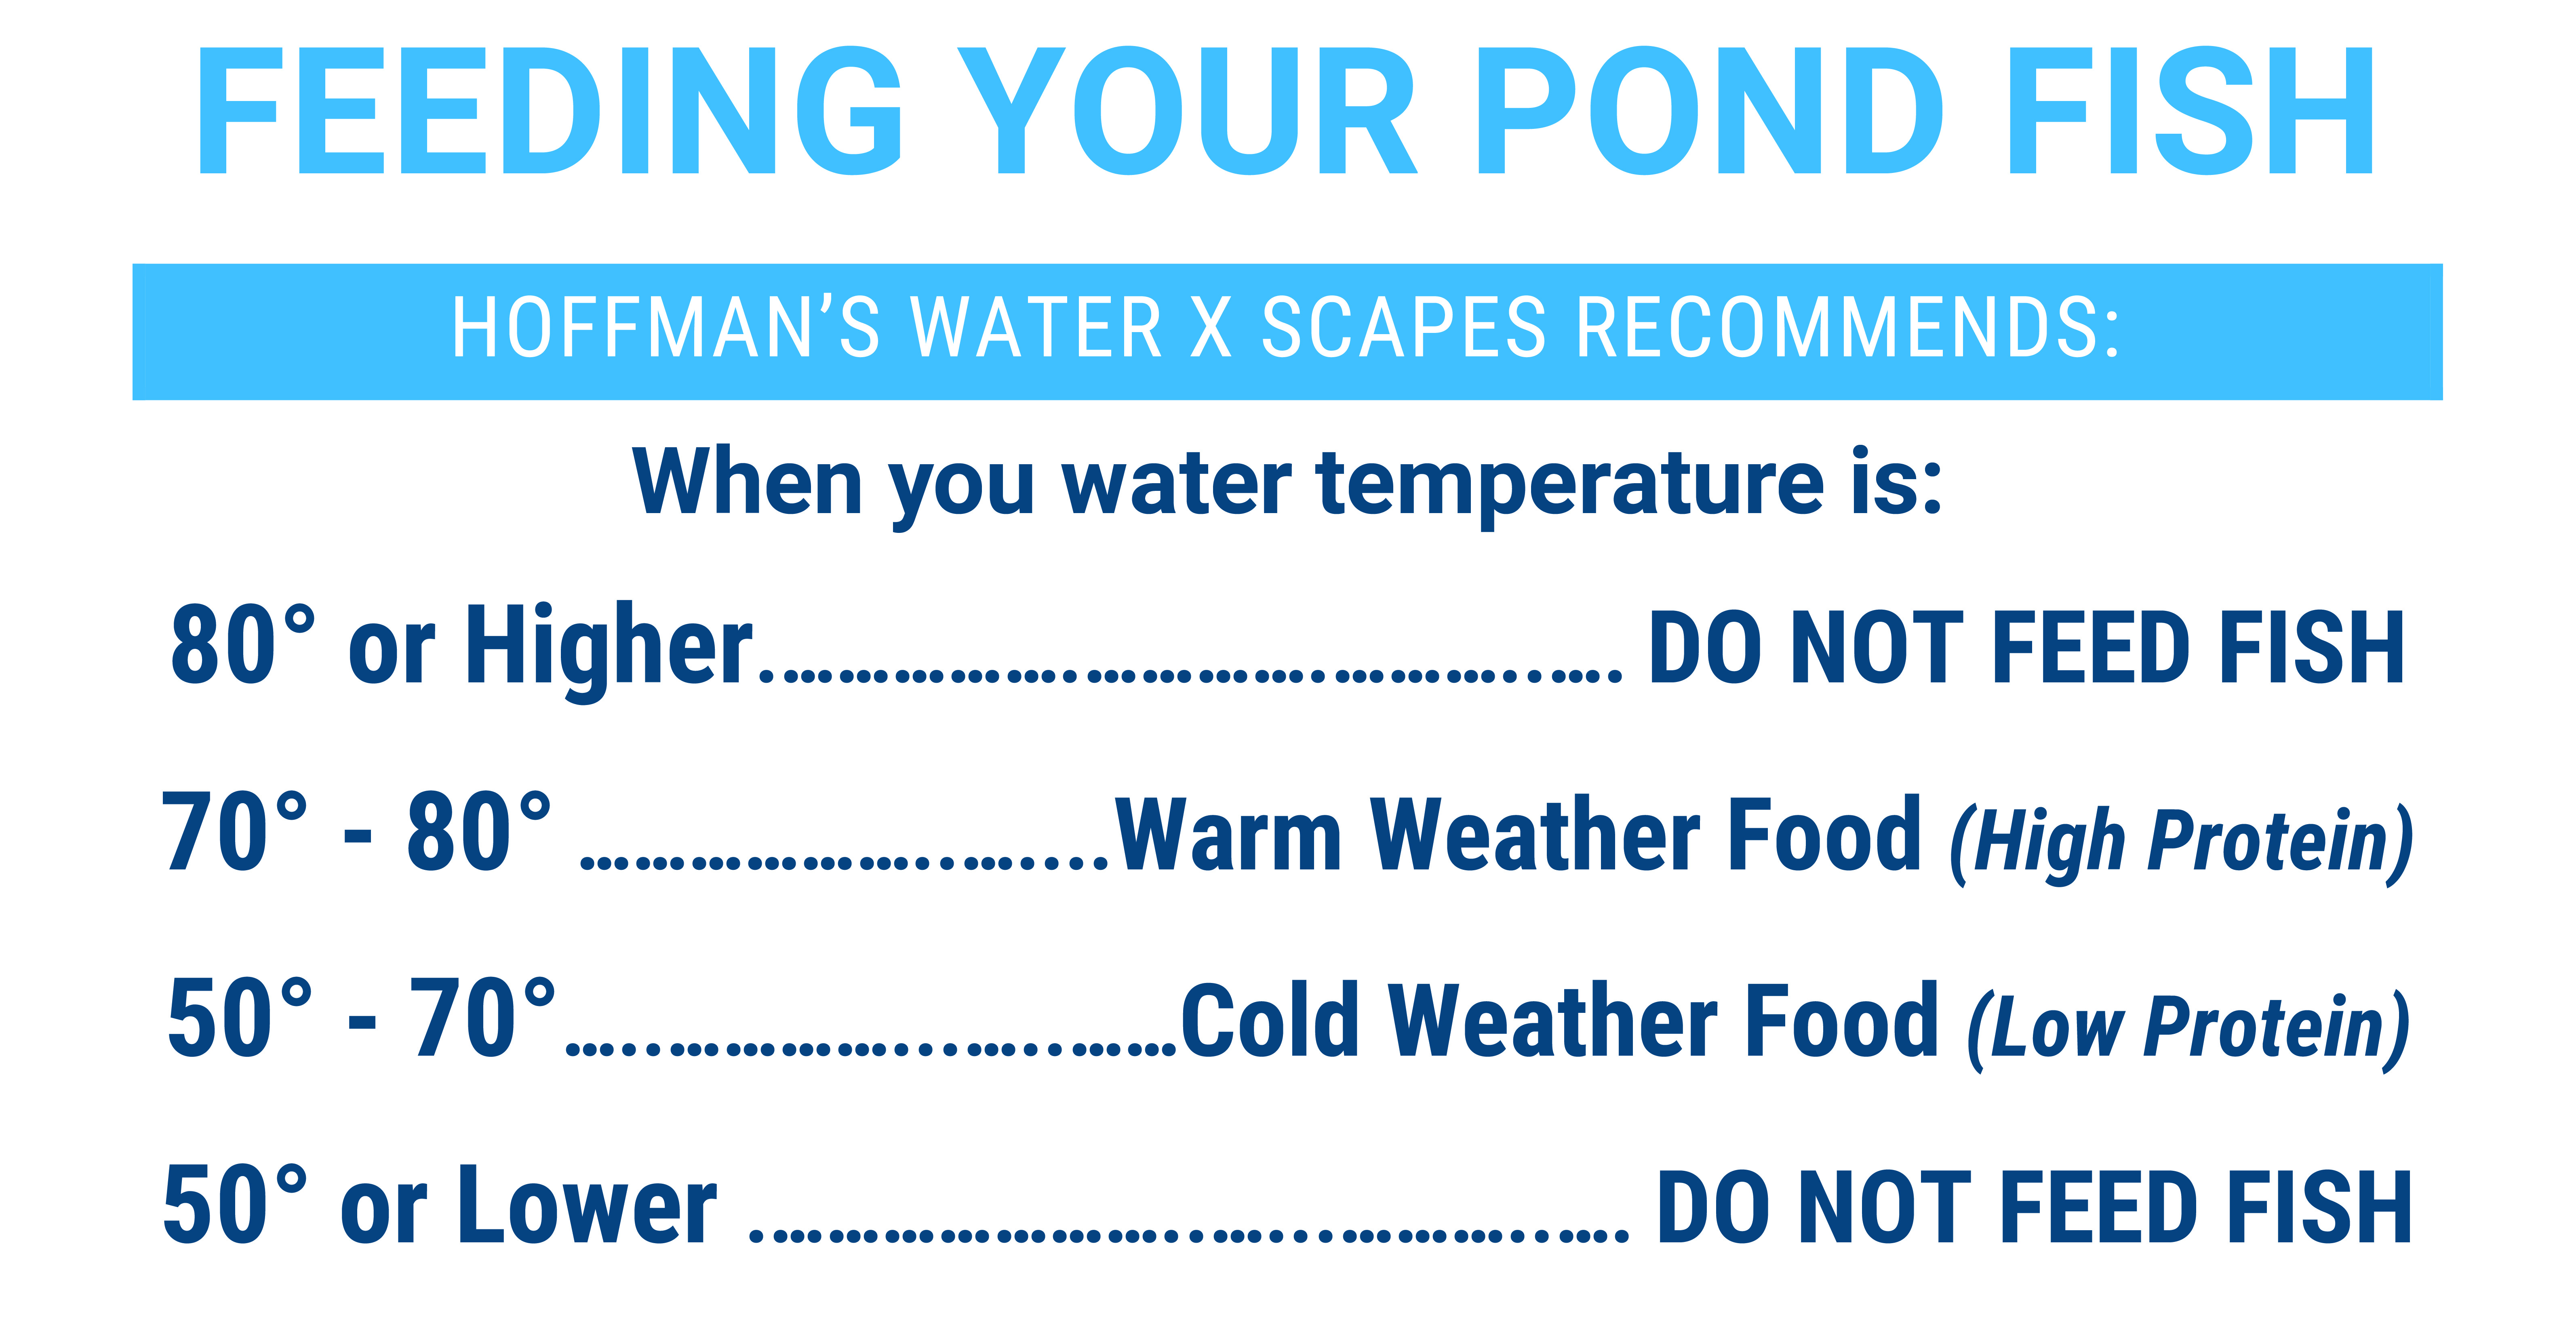 Feeding your pond fish, like koi fish, water temperature guide. Do not feed when water temperature are above 80 degrees or lower than 50 degrees. Remember, water and air temperatures will differ.